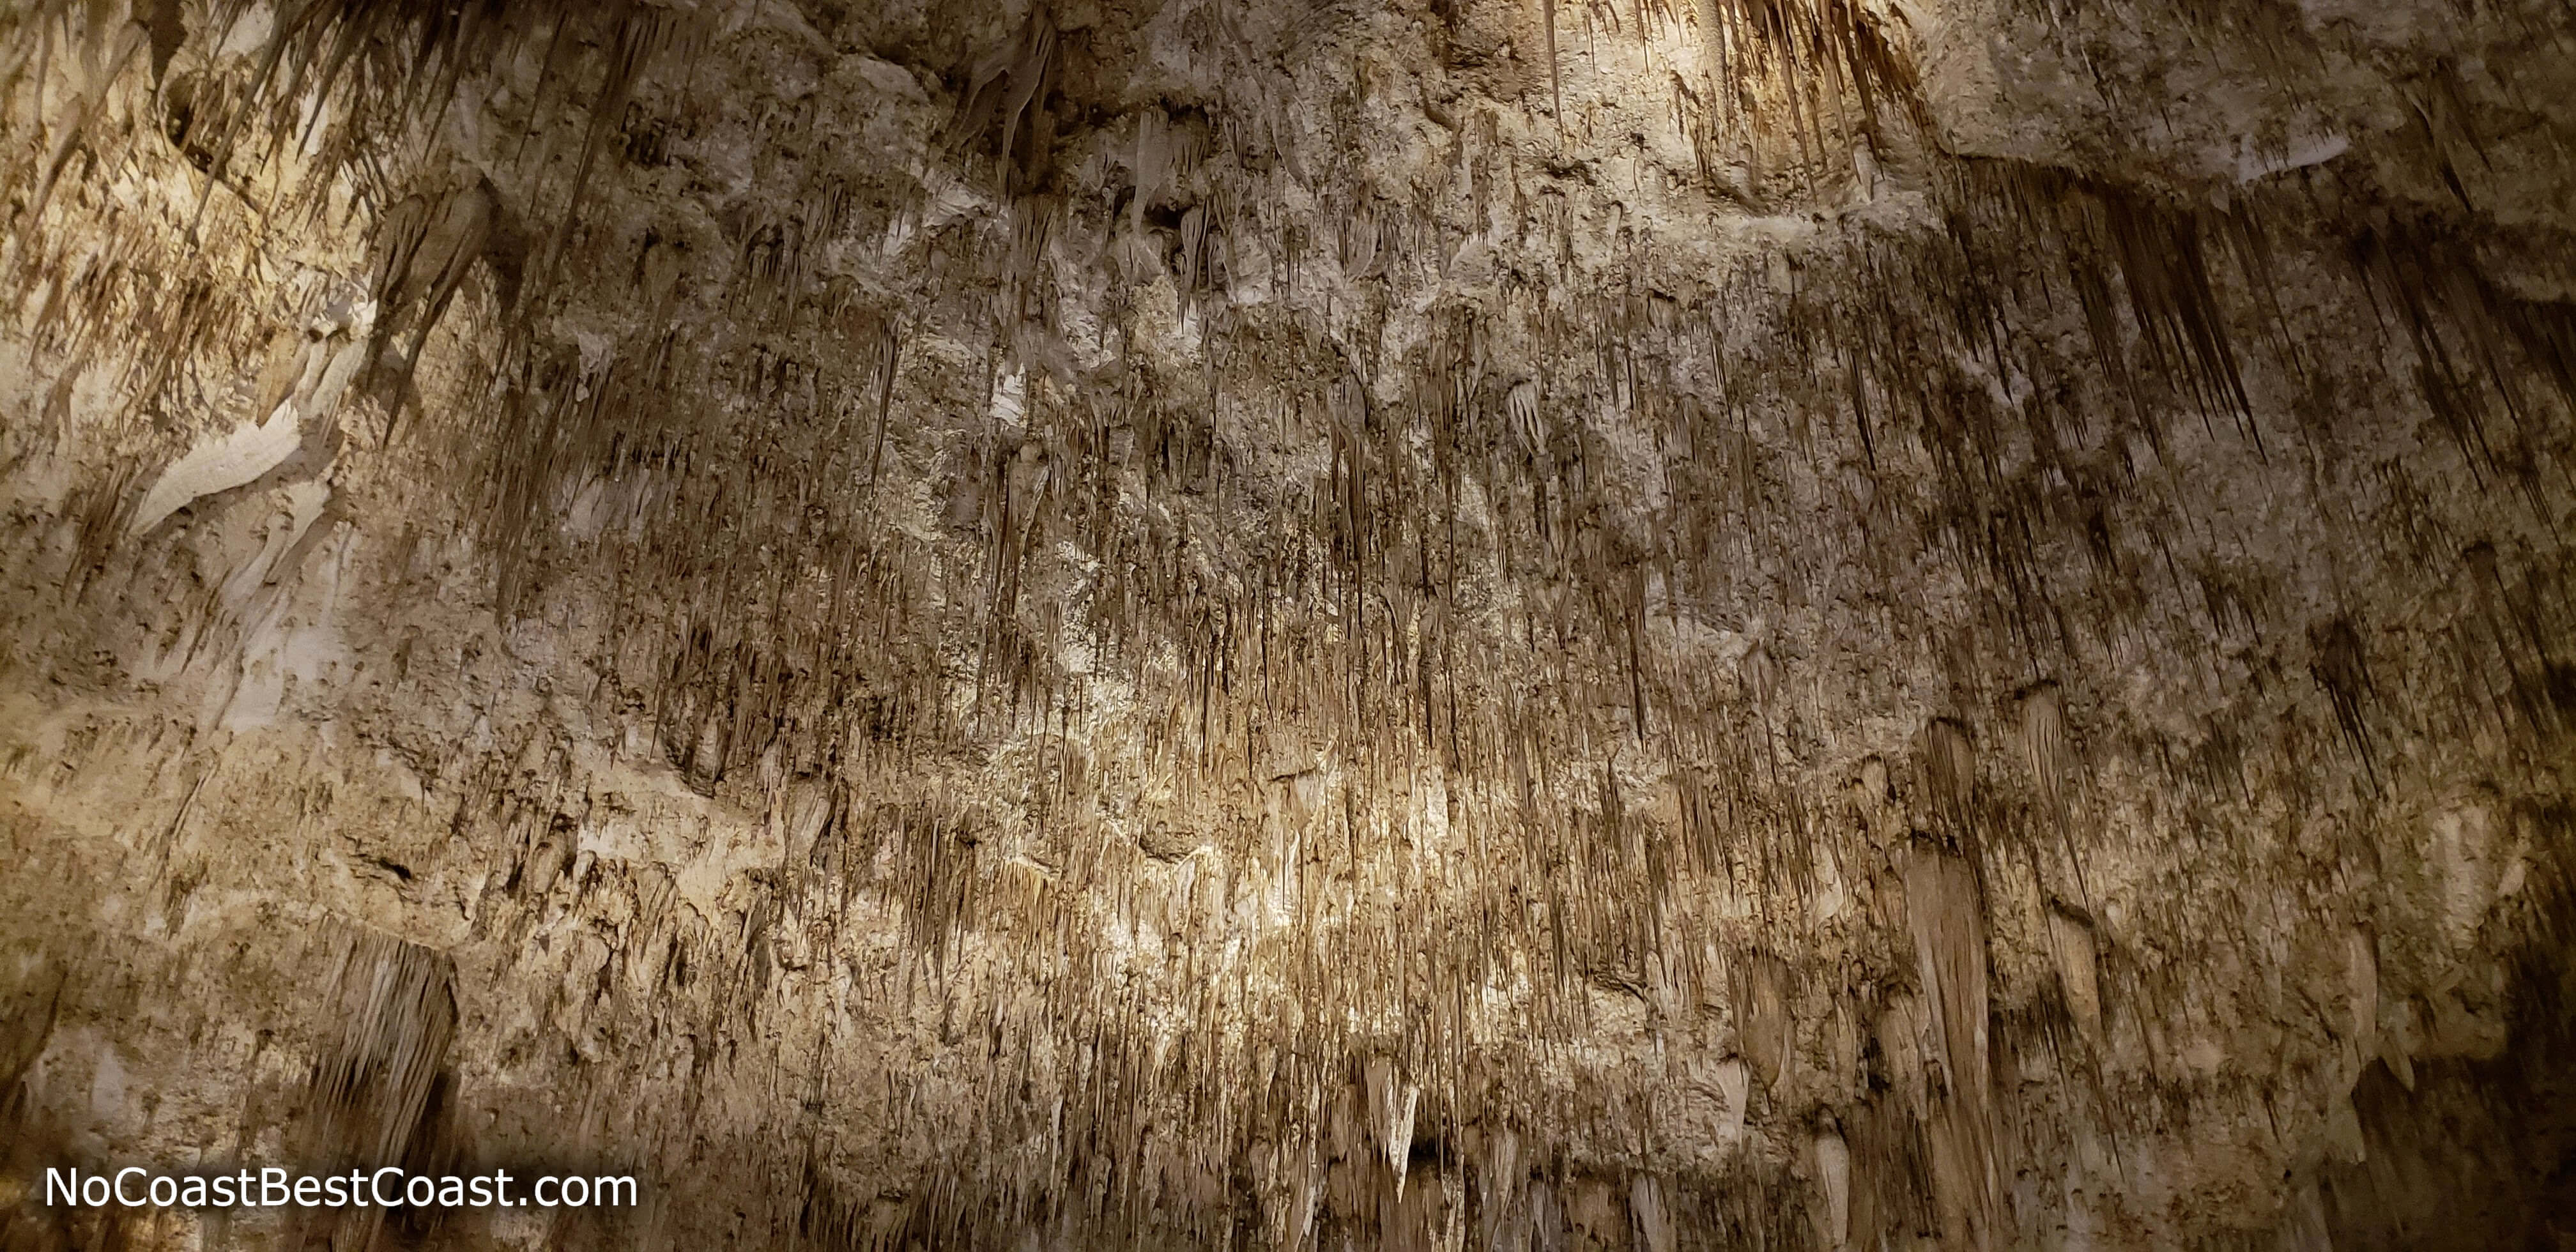 Hundreds of stalactites decorate the ceiling